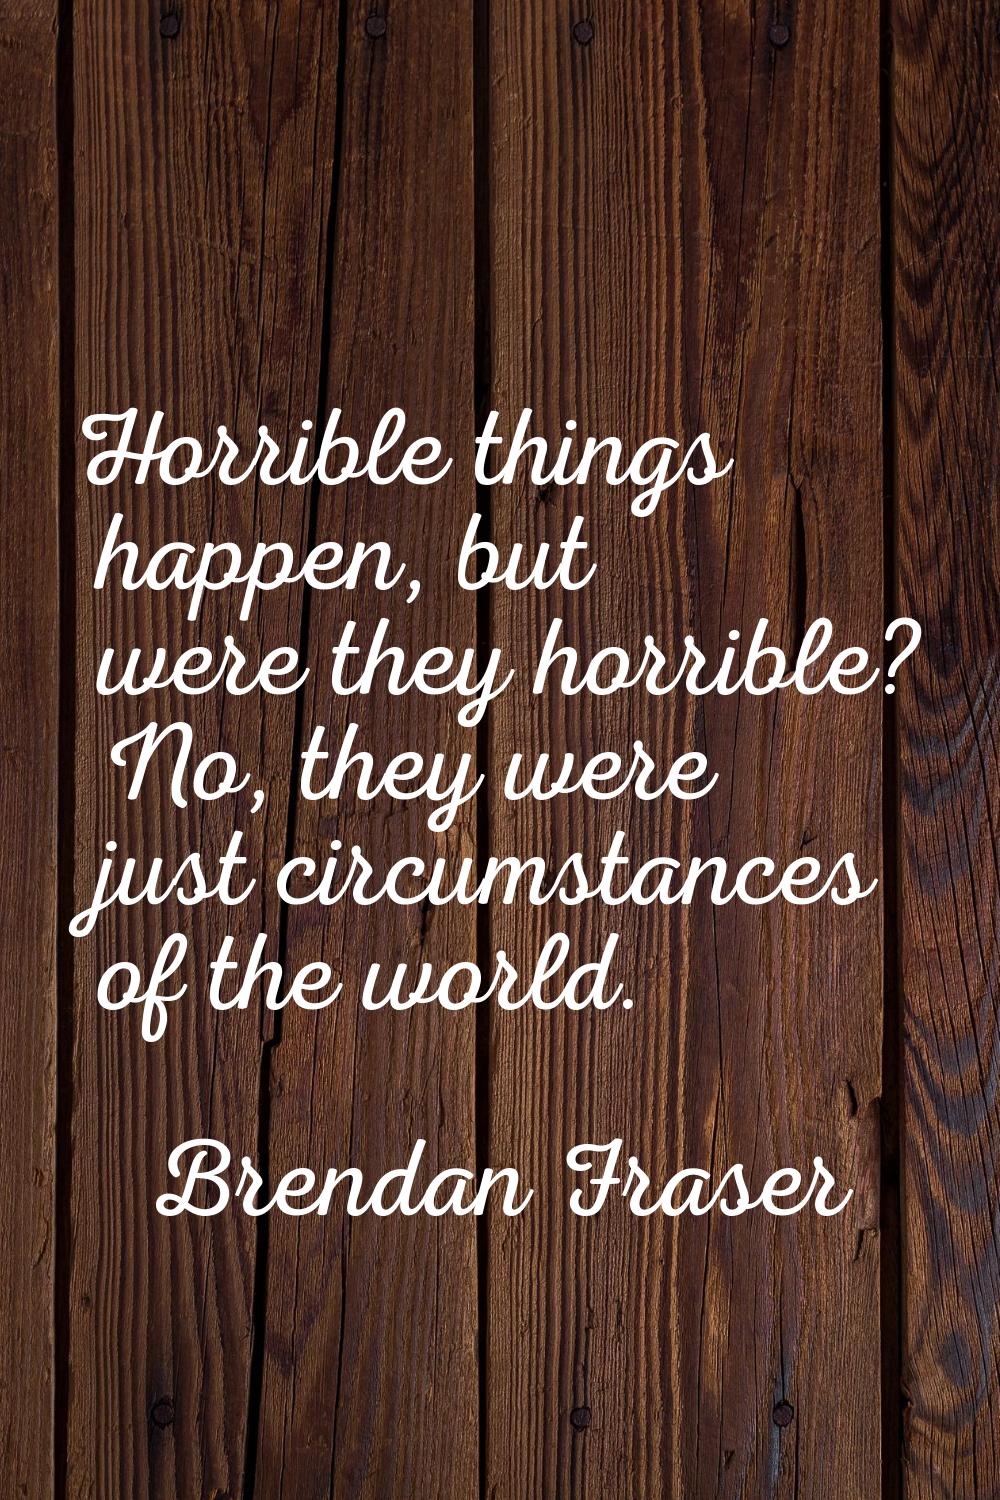 Horrible things happen, but were they horrible? No, they were just circumstances of the world.